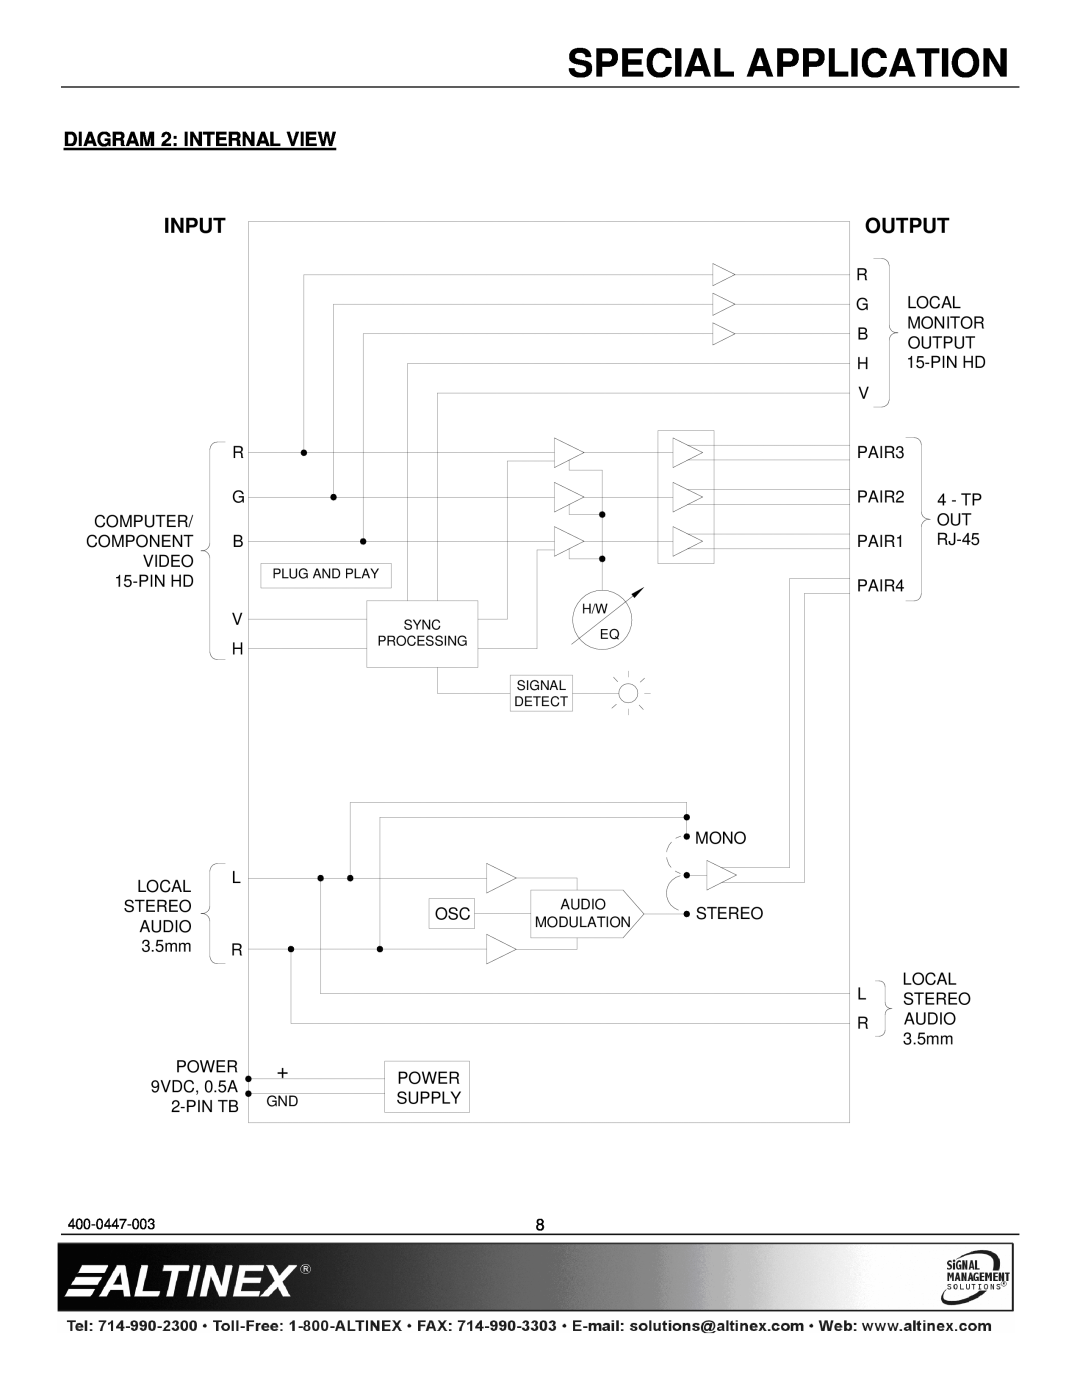 Altinex DS801-201, DS801-202 manual DIAGRAM 2 INTERNAL VIEW, Special Application, Input, Output 